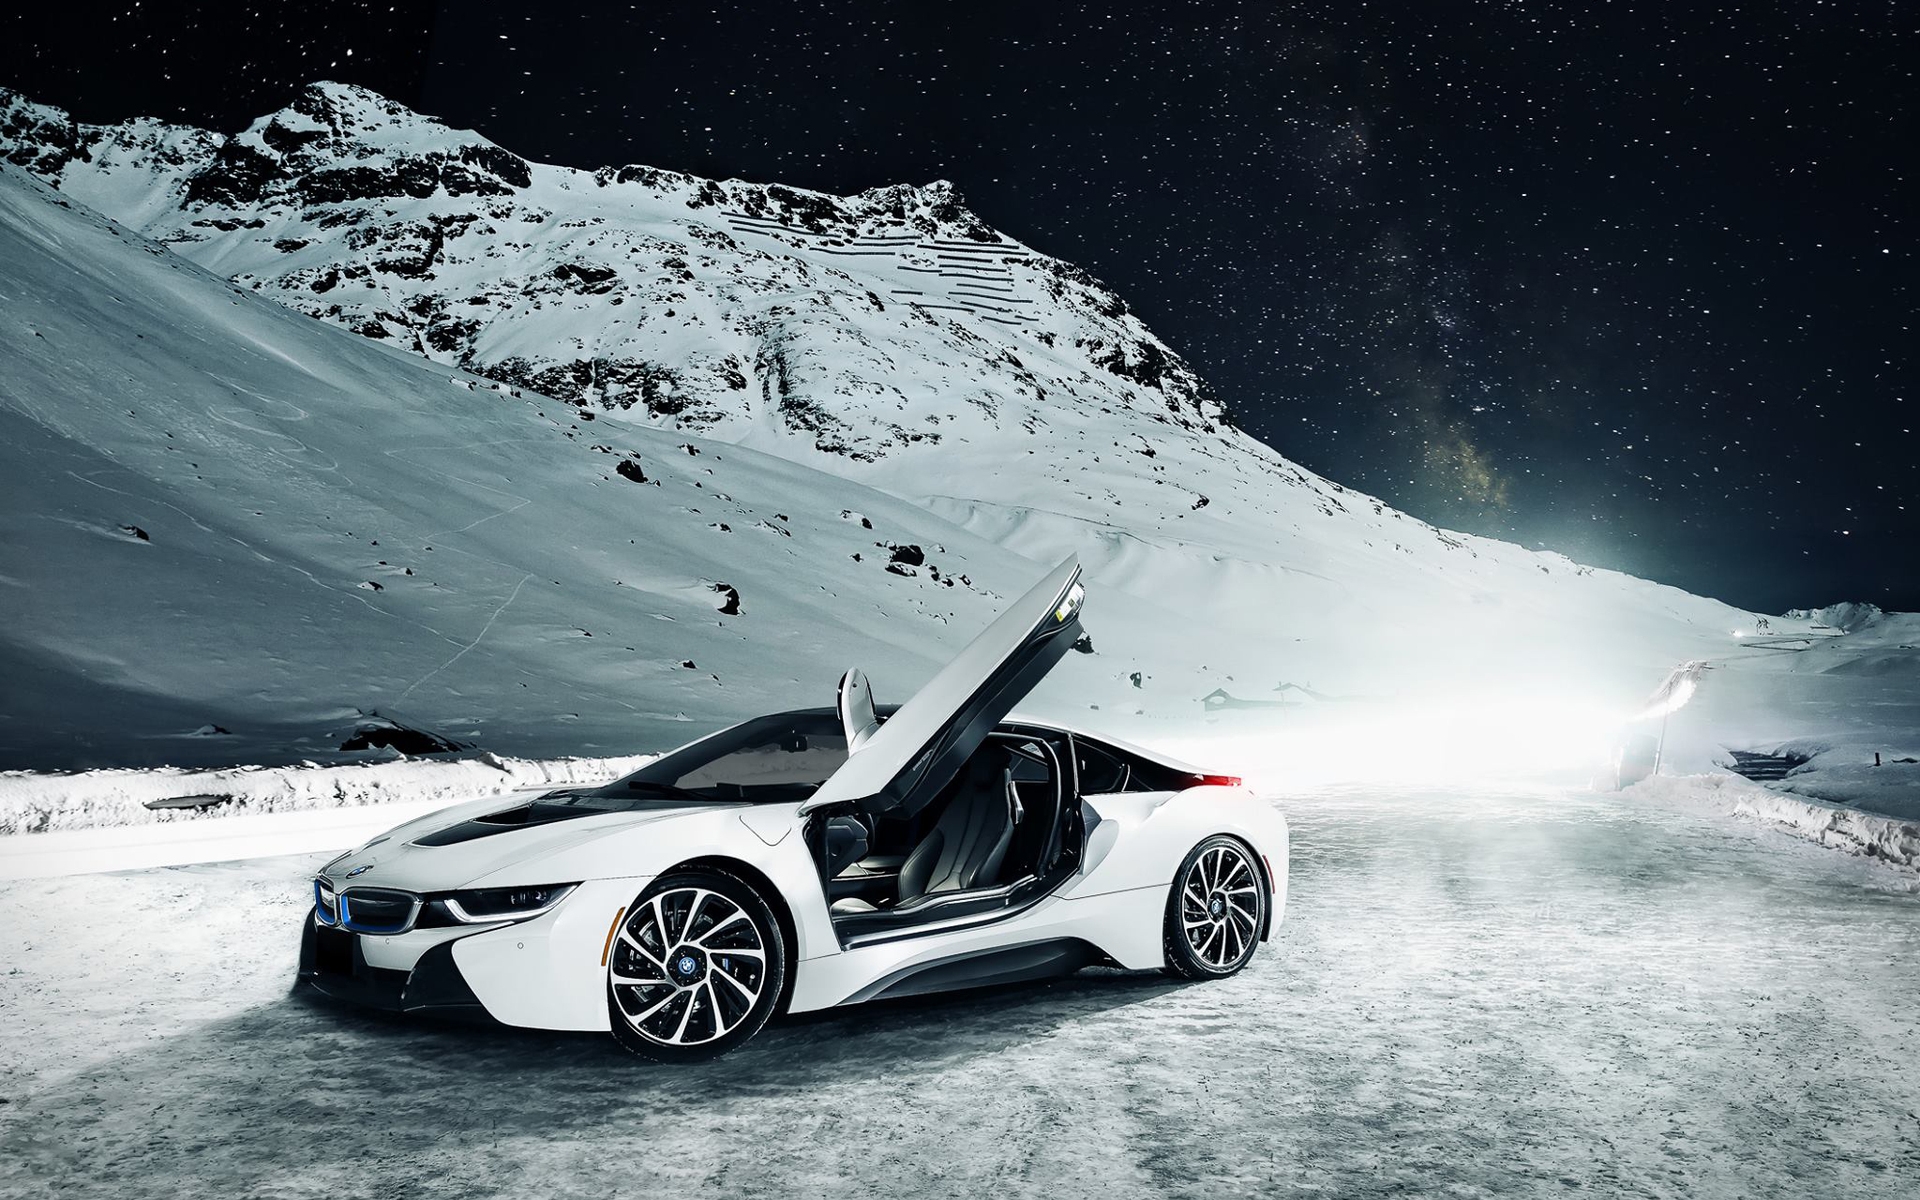 whit bmw i8 uhd wallpapers Ultra High Definition Wallpapers 4k